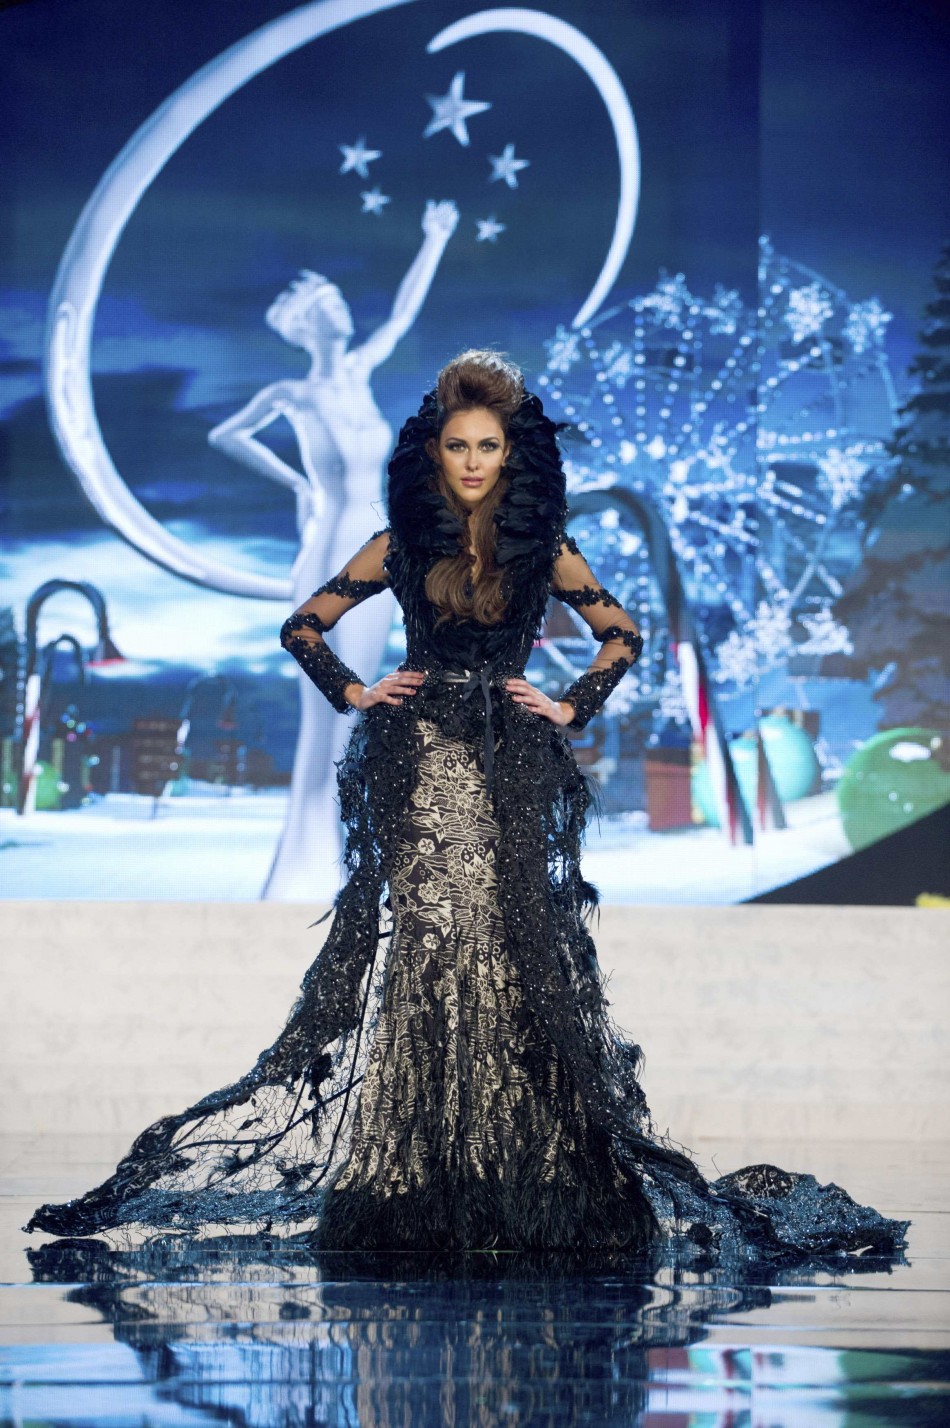 Miss Malaysia Kimberley Leggett on stage at the 2012 Miss Universe National Costume Show at PH Live in Las Vegas